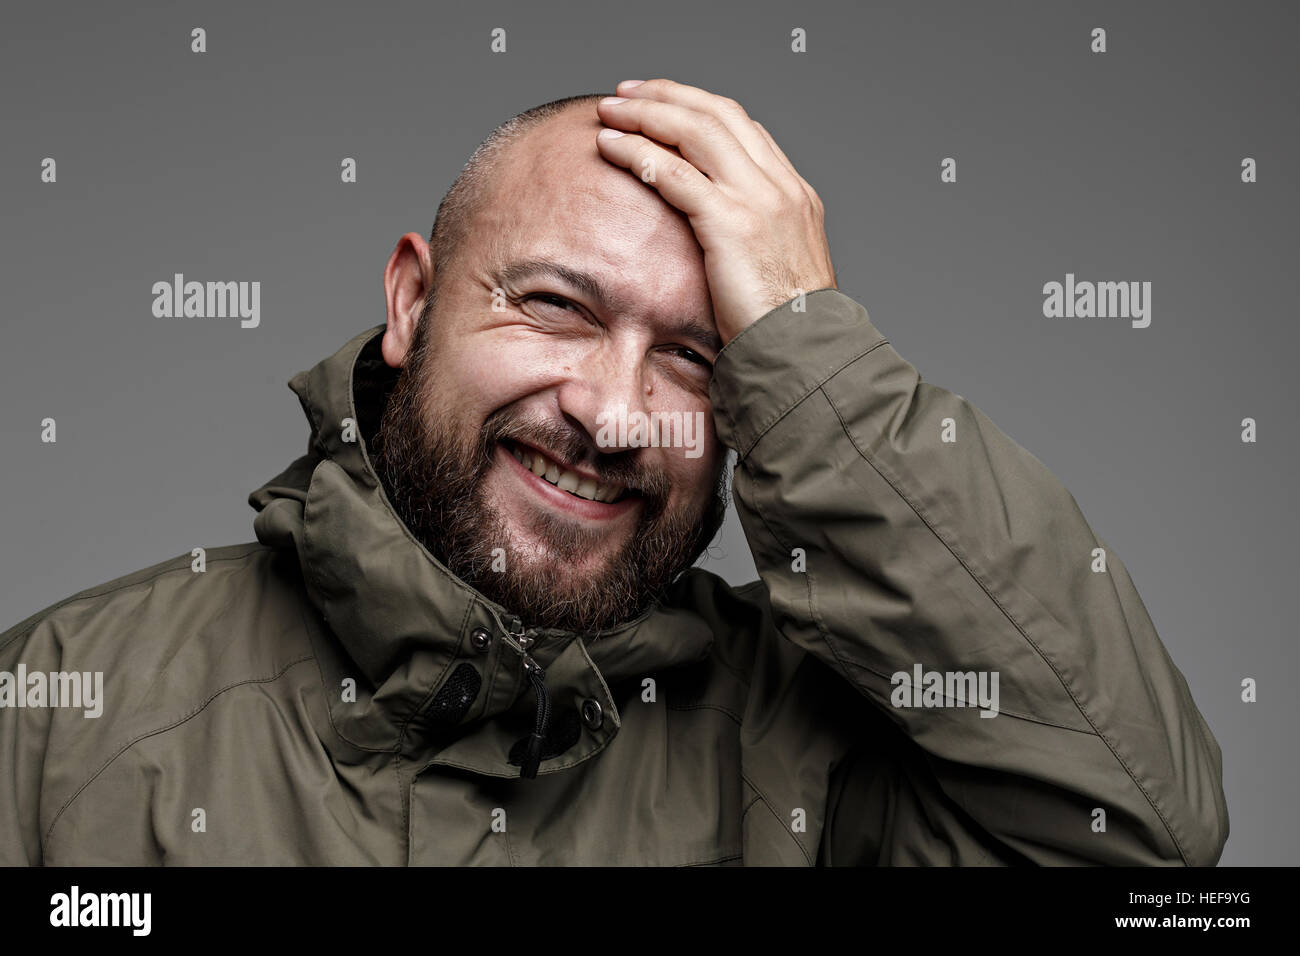 fear,male,portrait,man,shock,face,white,open,mouth,bald,background,isolated,handsome,scream,head,displeased,young,afraid,panic Stock Photo